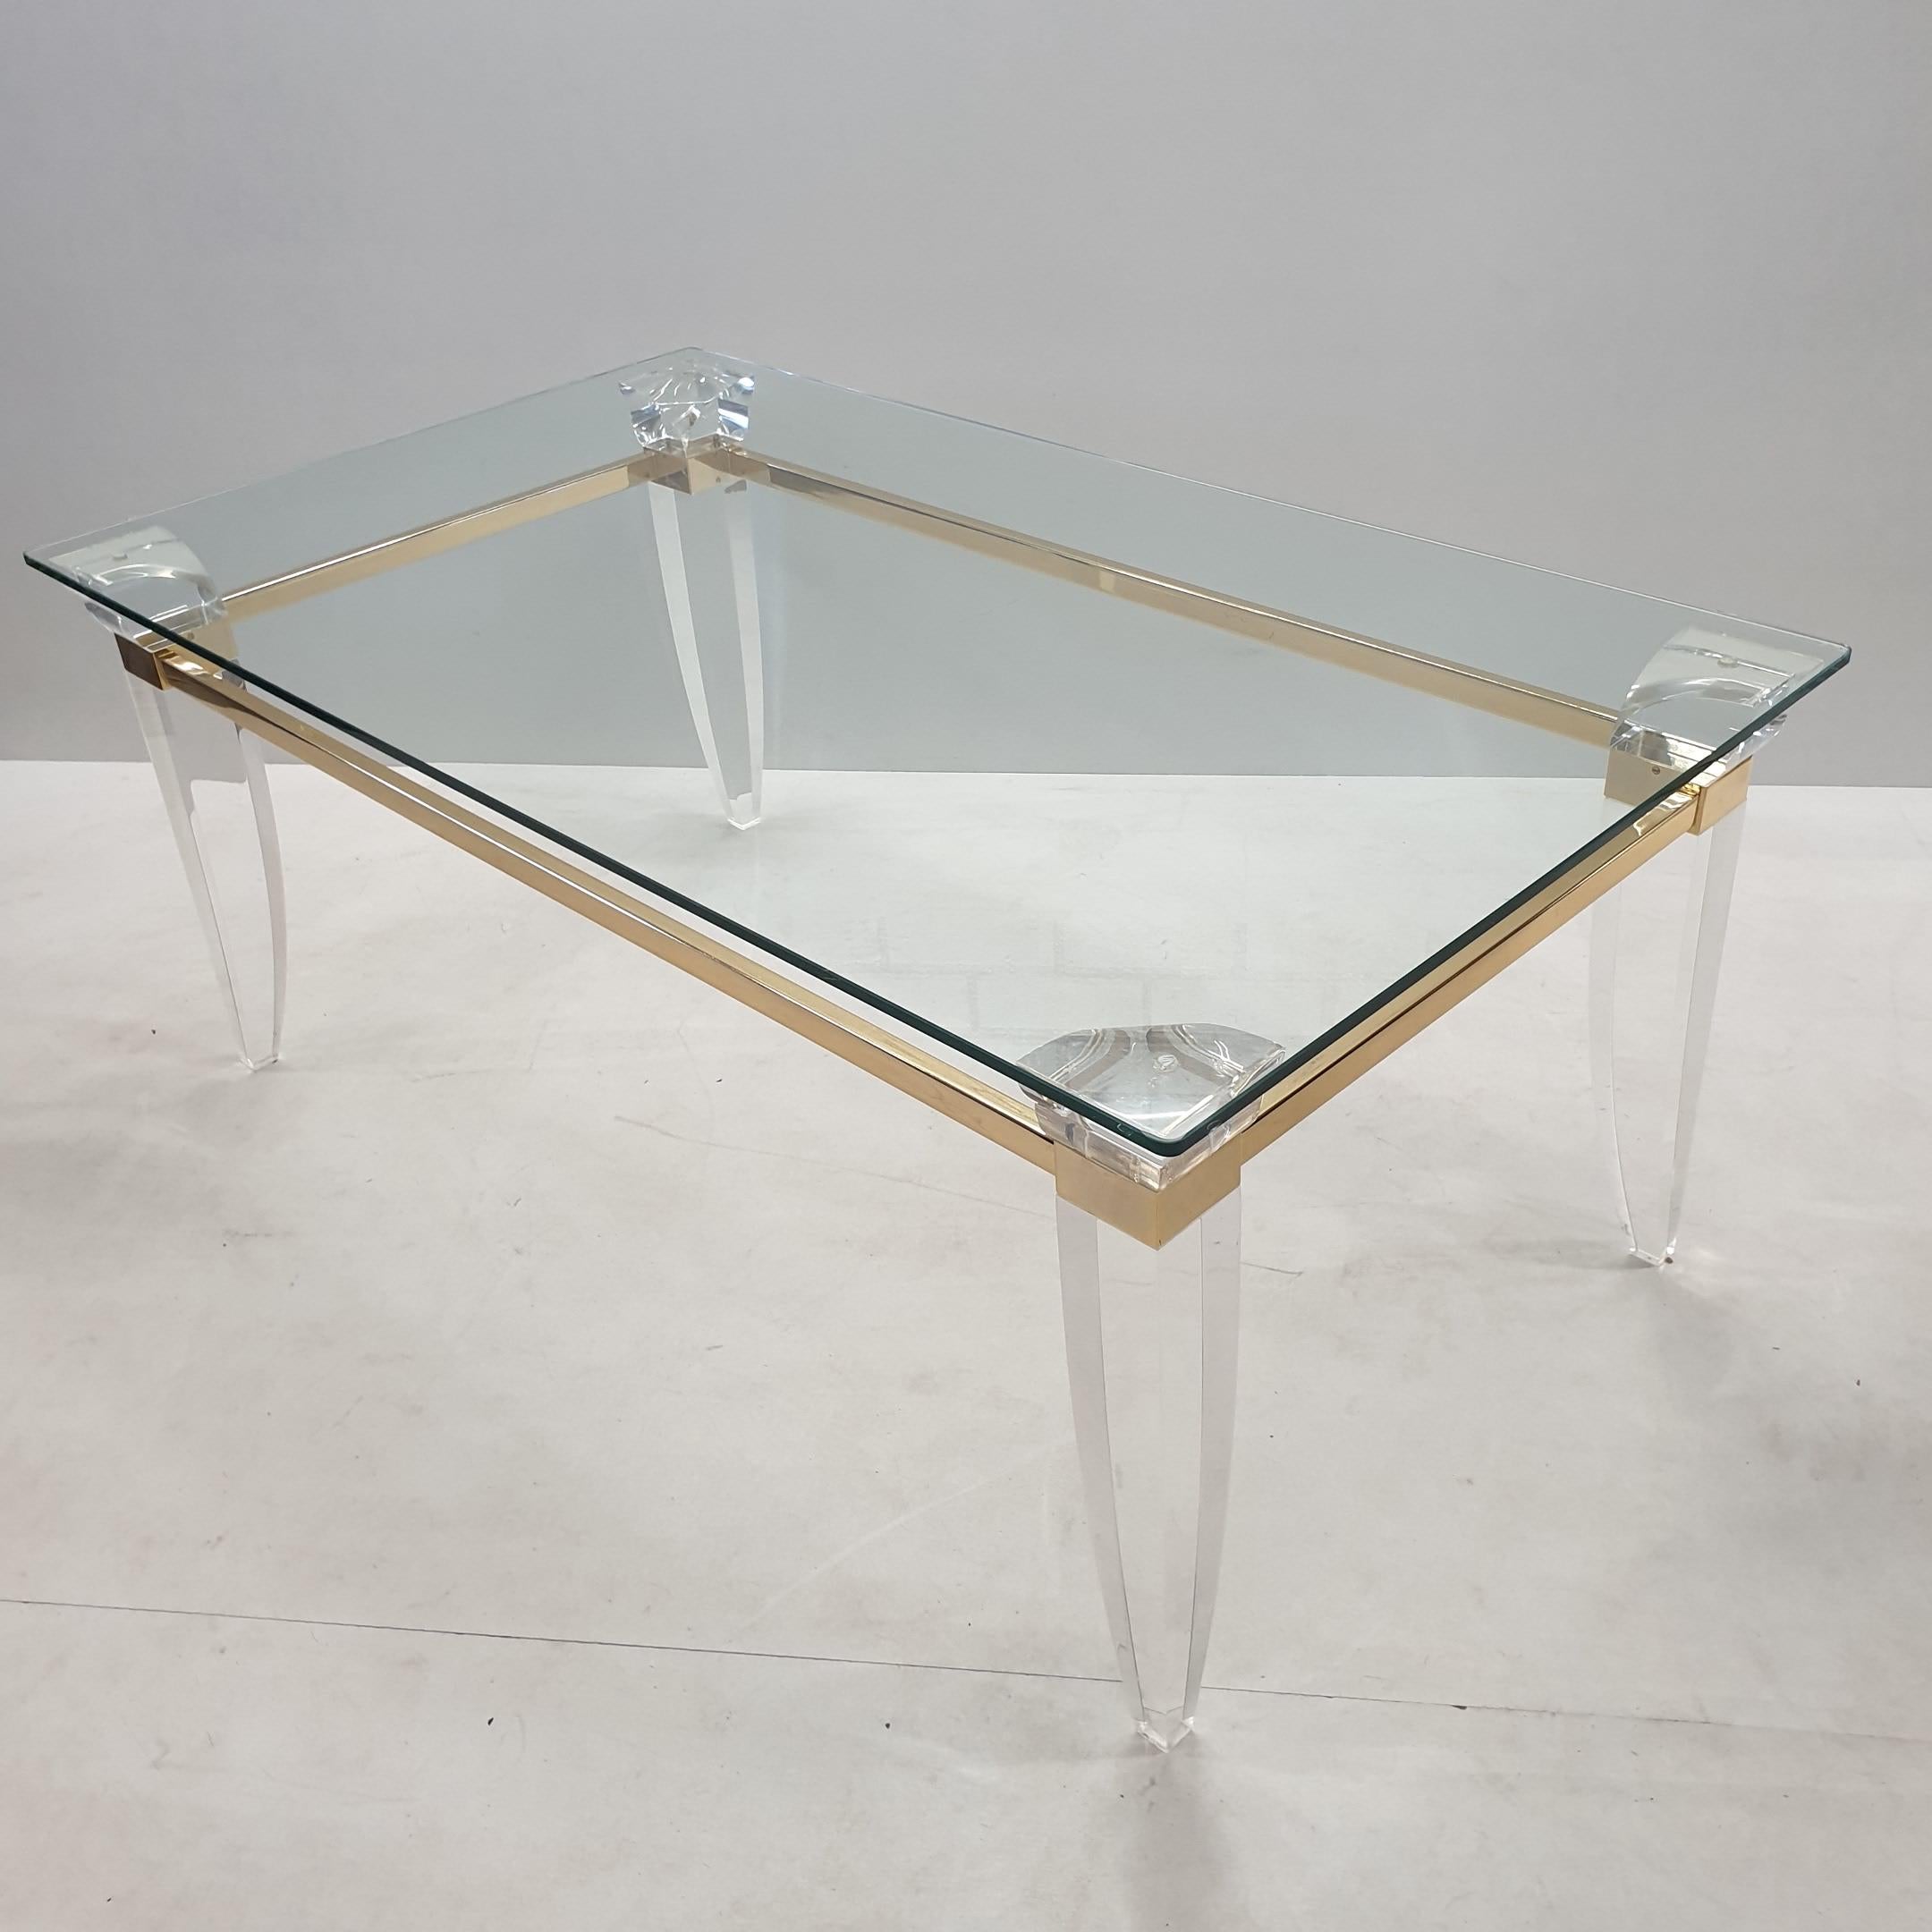 Lucite, Gold Plating and Glass Coffee Table with Assymetrical Table Legs, 1980s For Sale 2